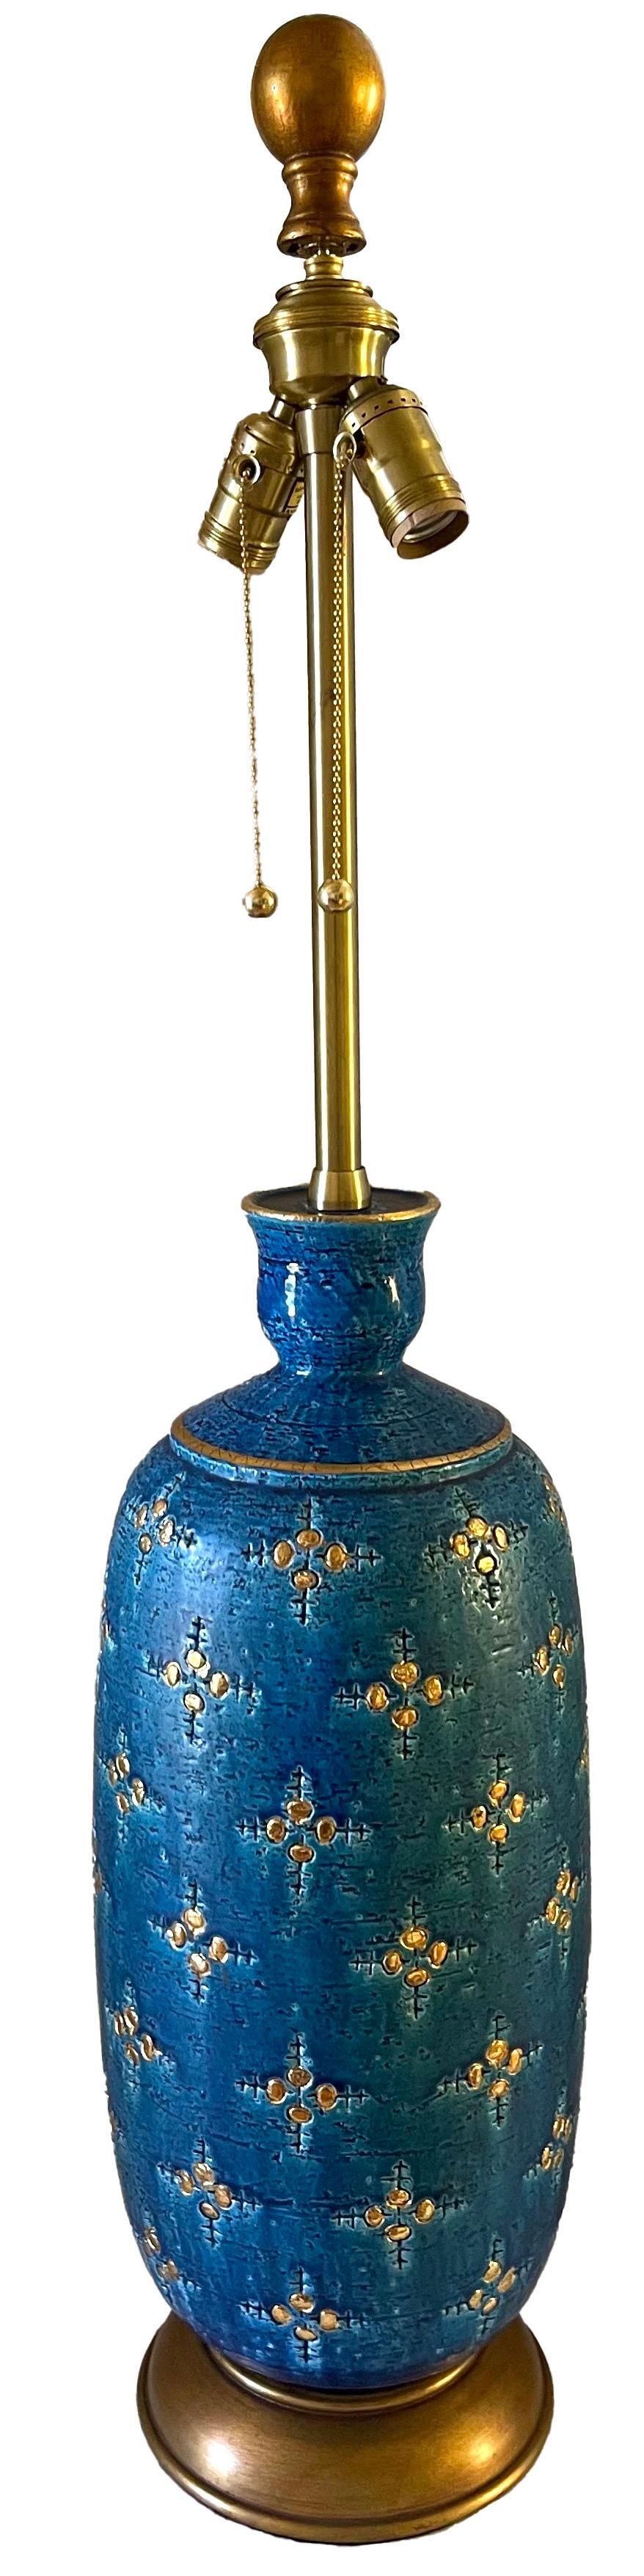 Very large Italian Bitossi Rimini blue & gold ceramic lamp by Marbro. Dazzling turquoise ceramic lamp body with hand painted gold accents. Original gold painted wood base.
Newly rewired with original brass sockets, clear cord with side switch. New